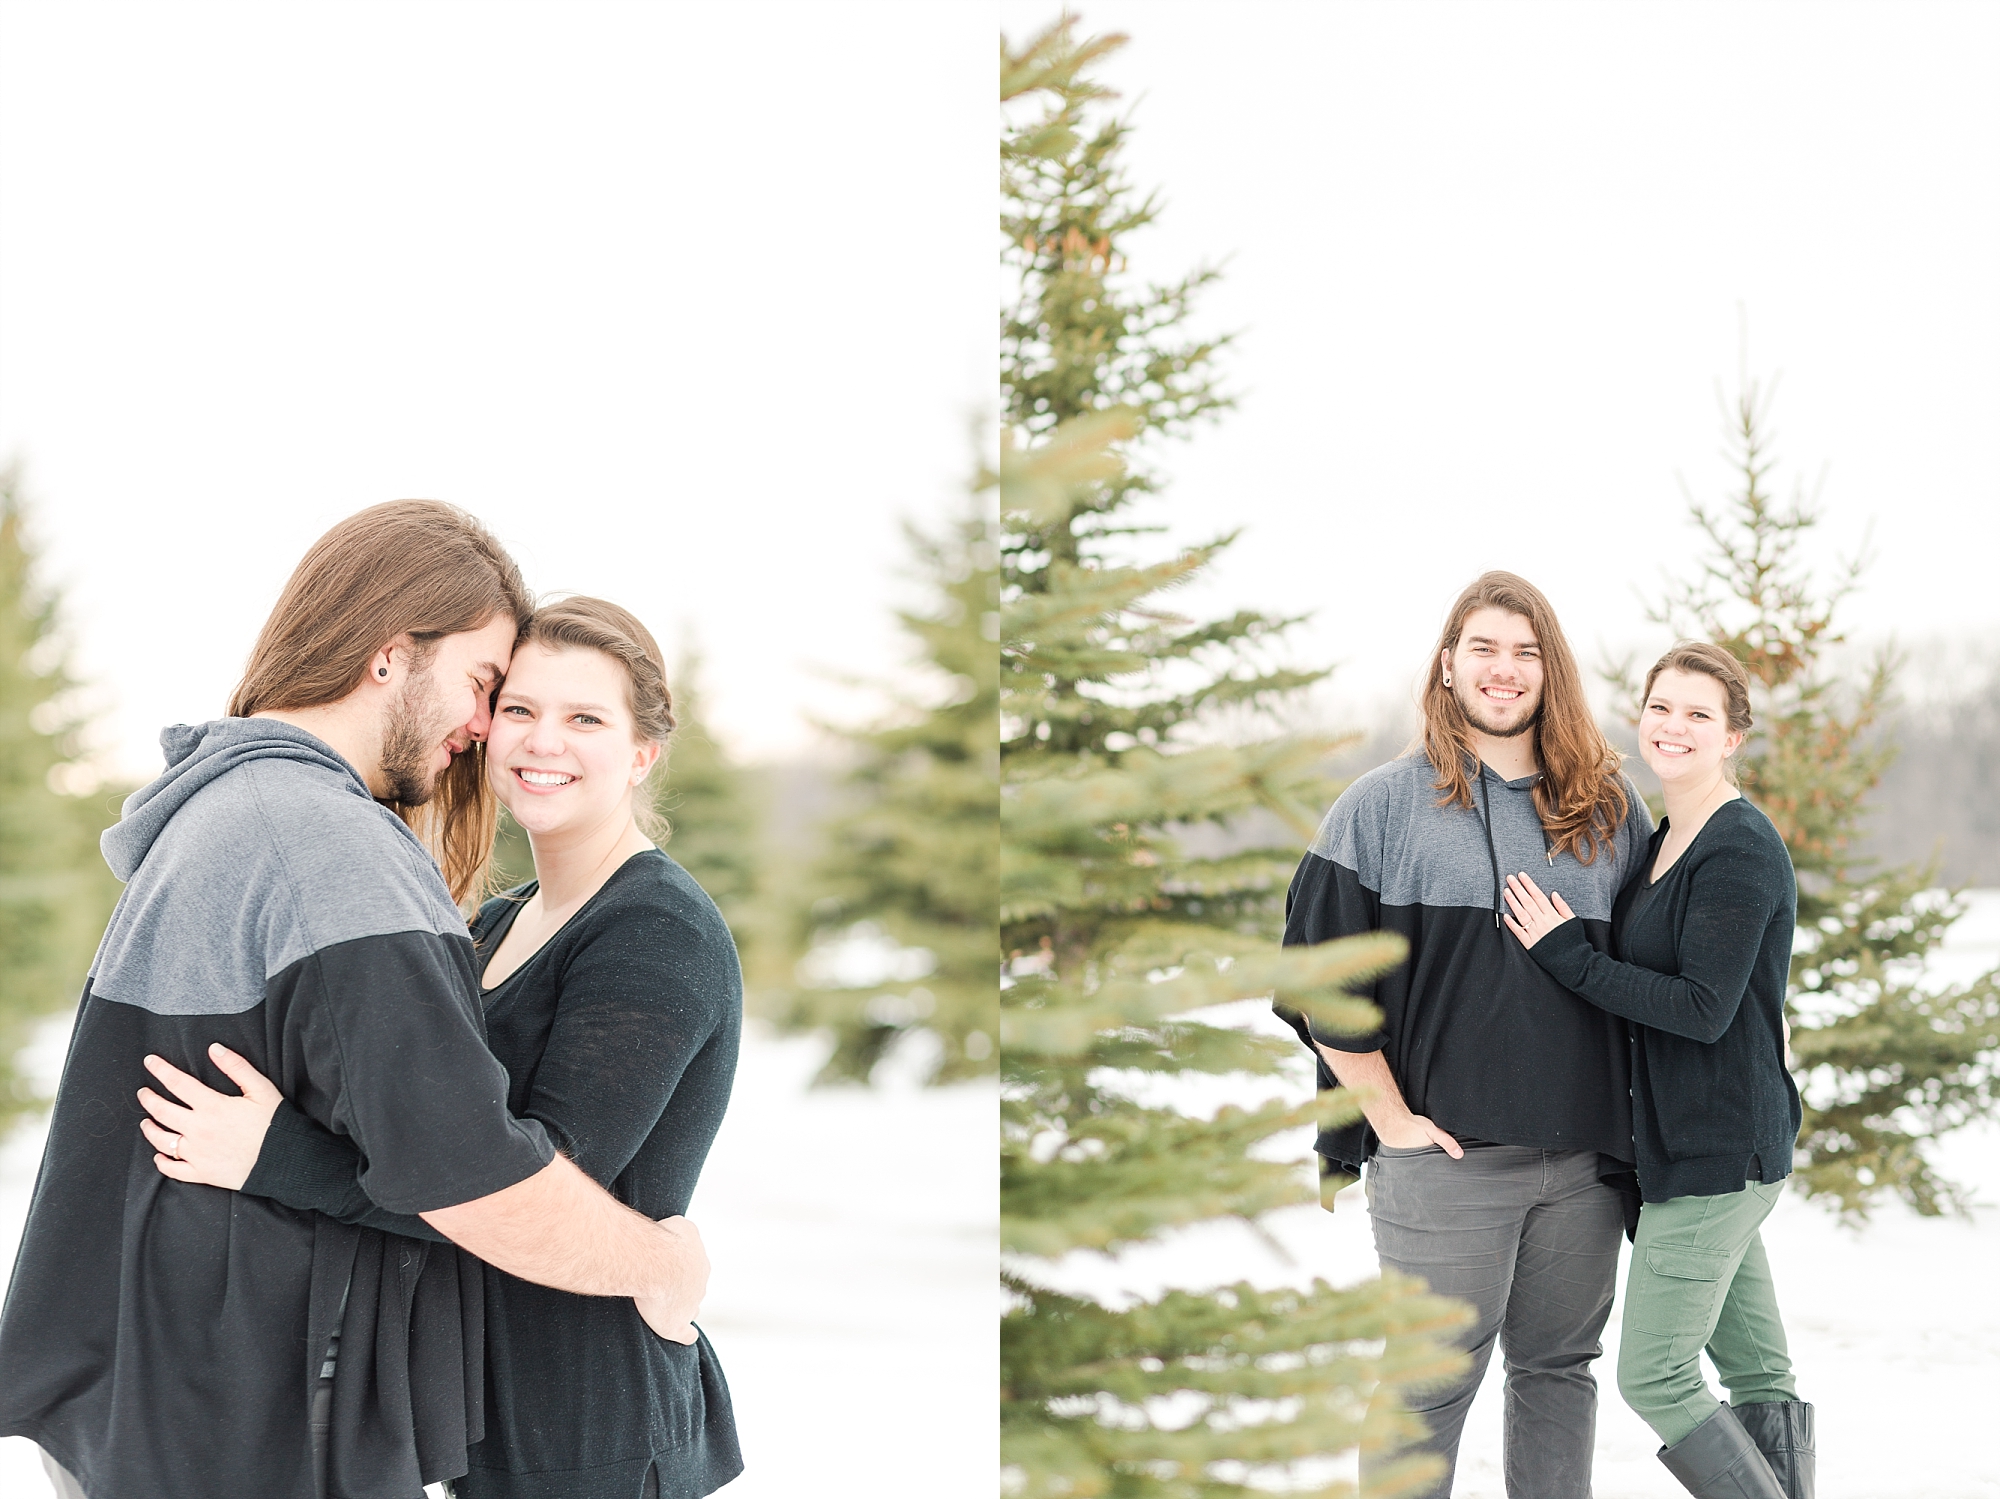 Engagement Photos in winter pine trees with snow